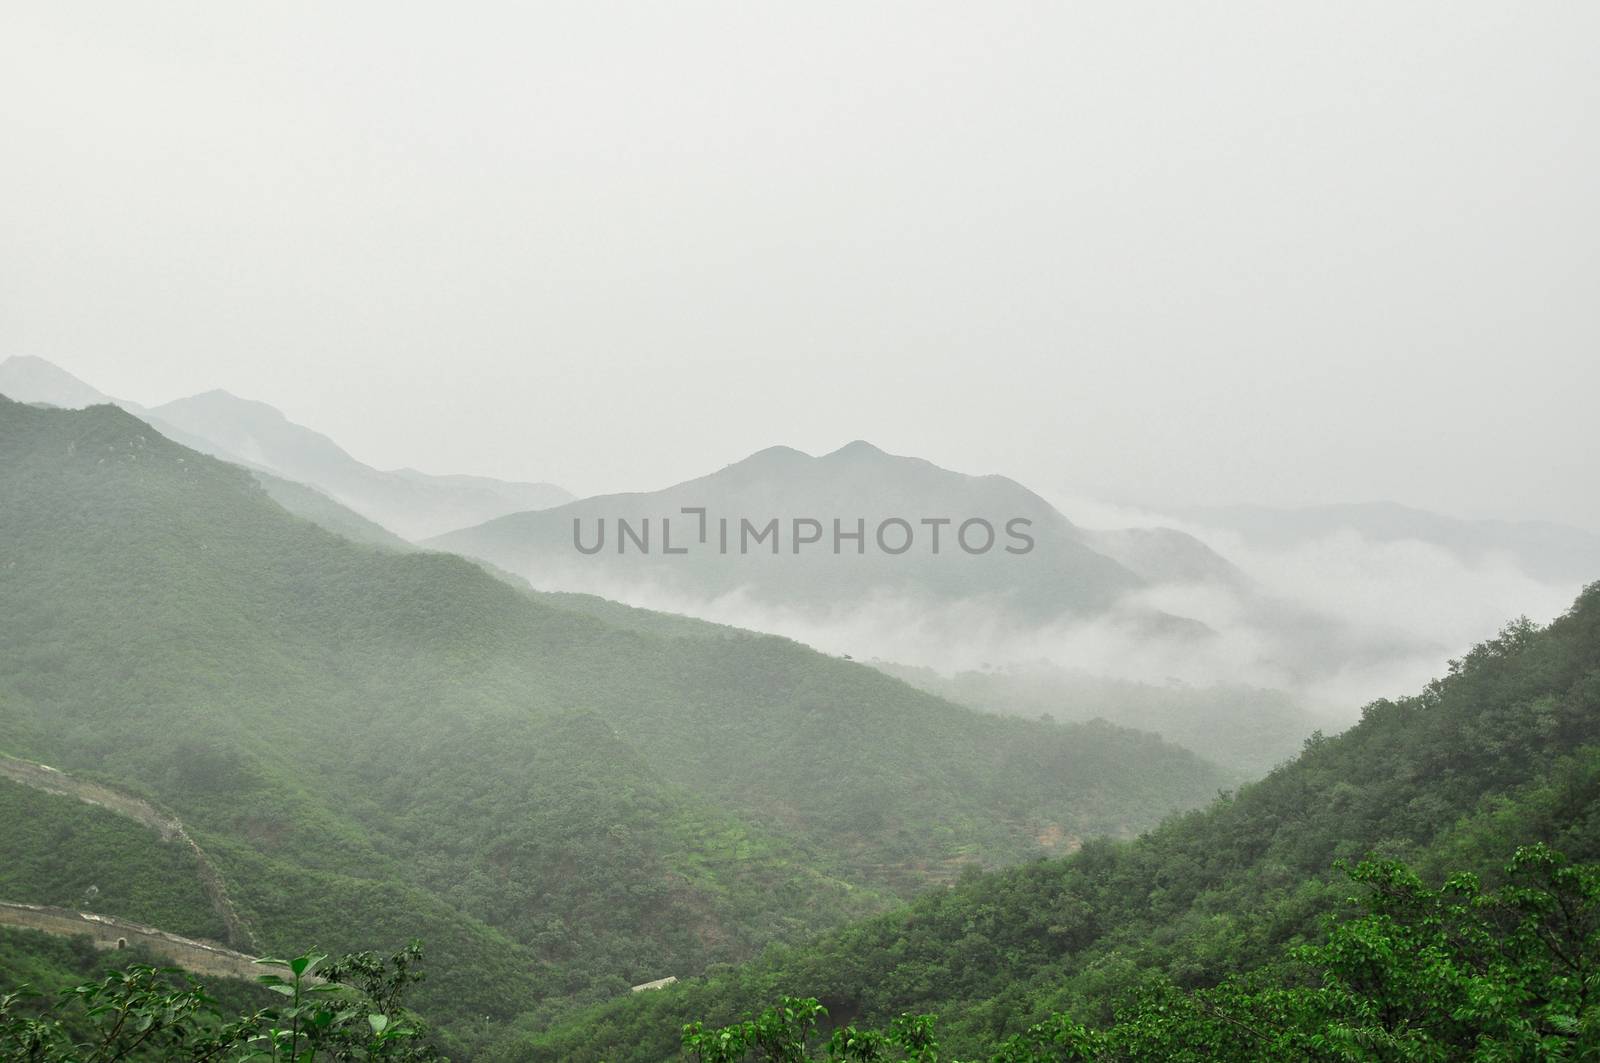 Great Wall fog over mountains in Beijing, China.